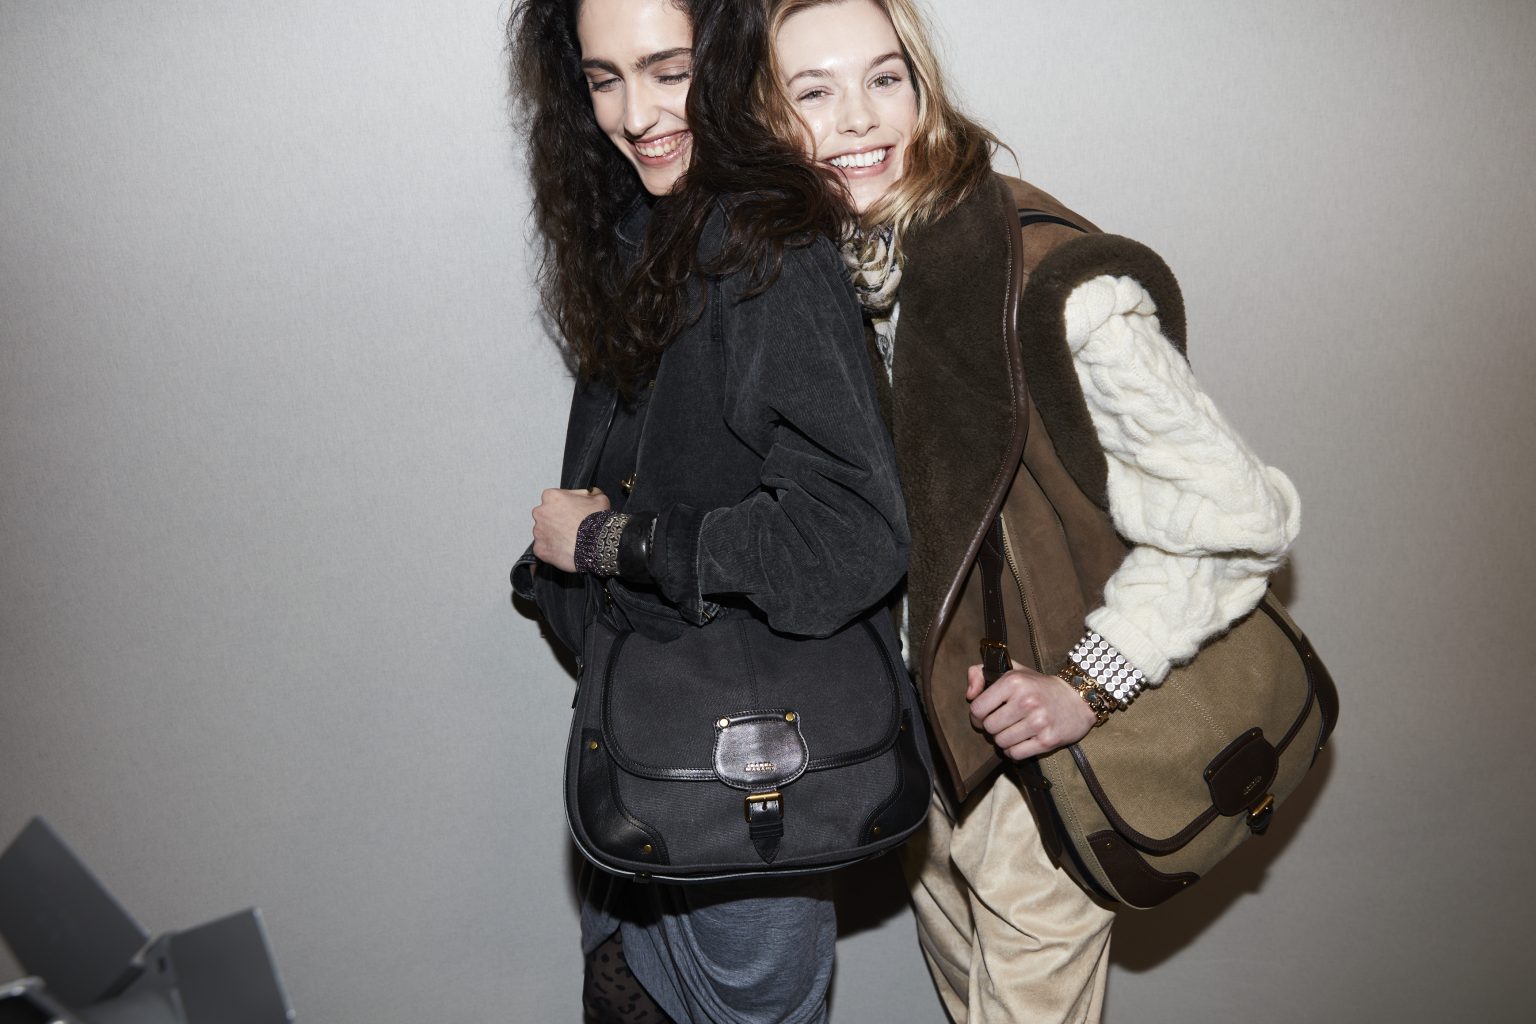 Backstage image of two female models, one wearing shades of black and grey, the other in tan and brown, both with messenger bags.